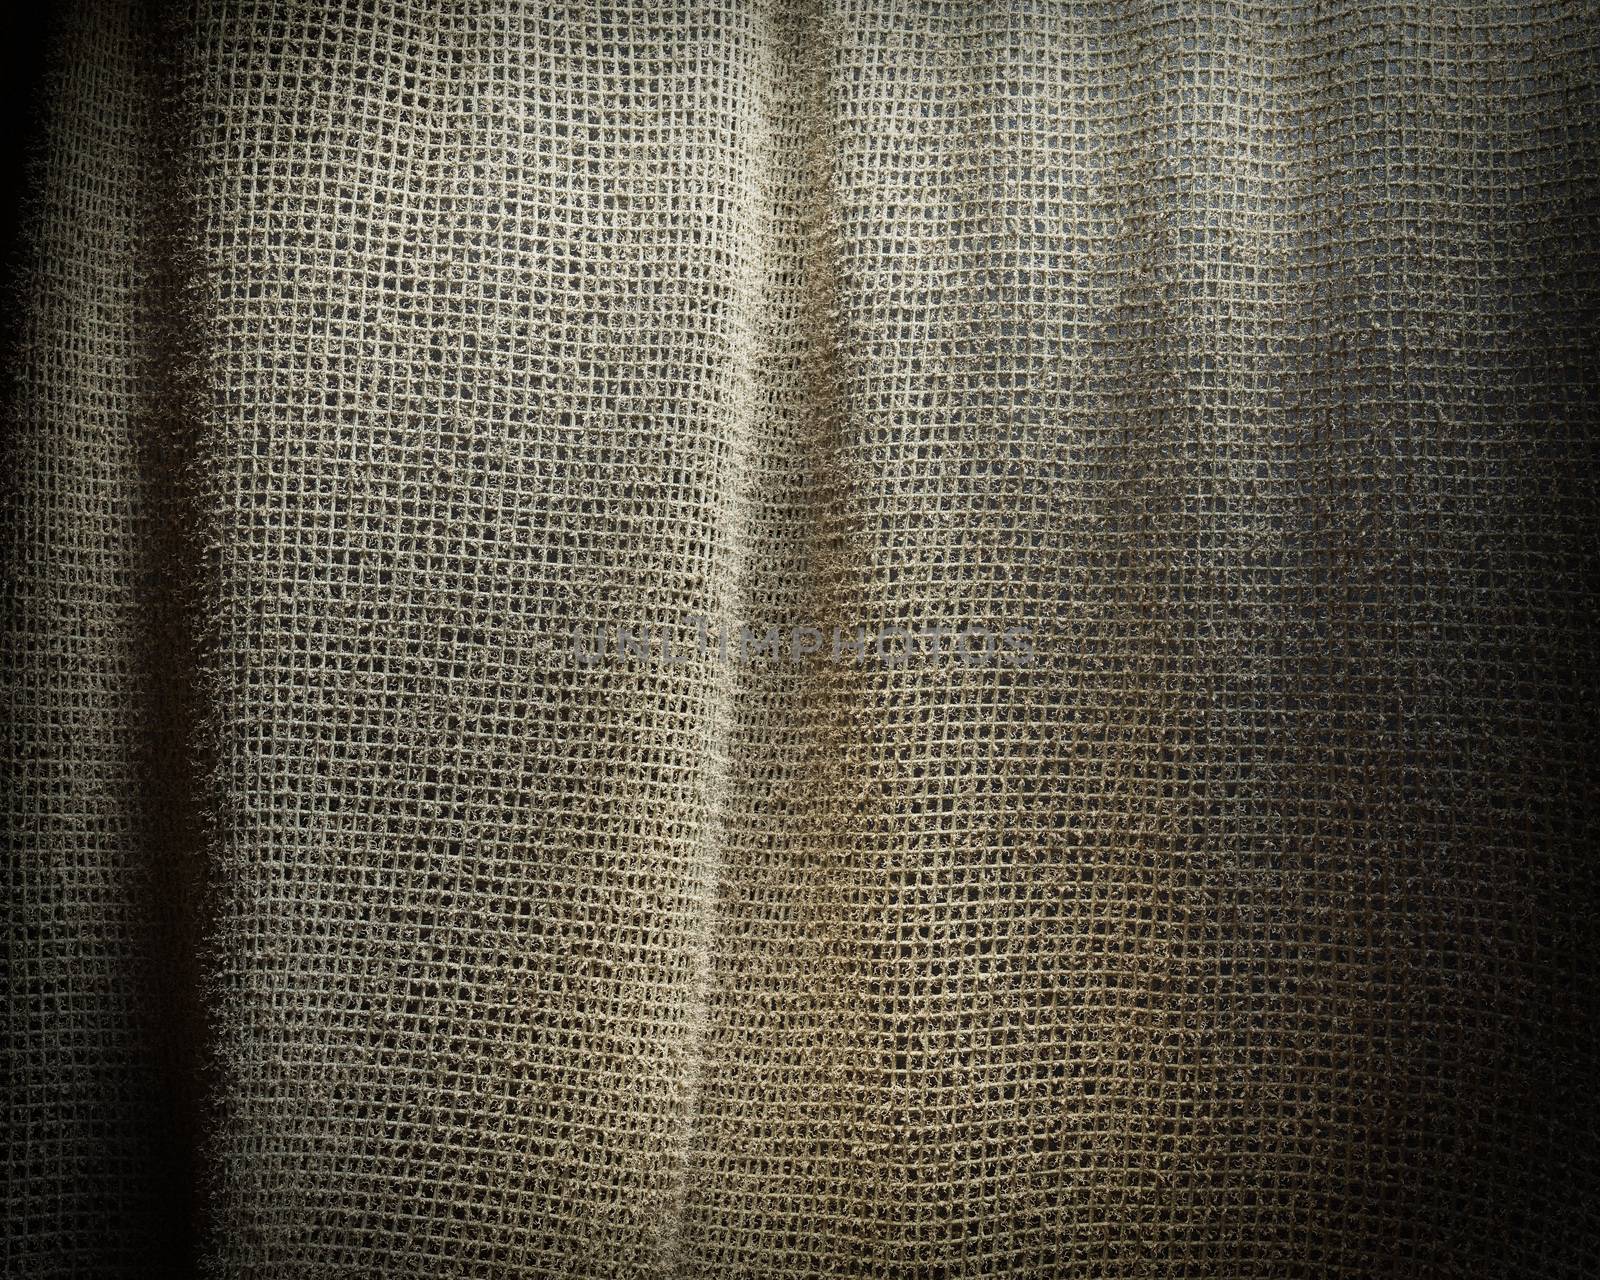 Grey sackcloth texture background. Soft fabric textile material.